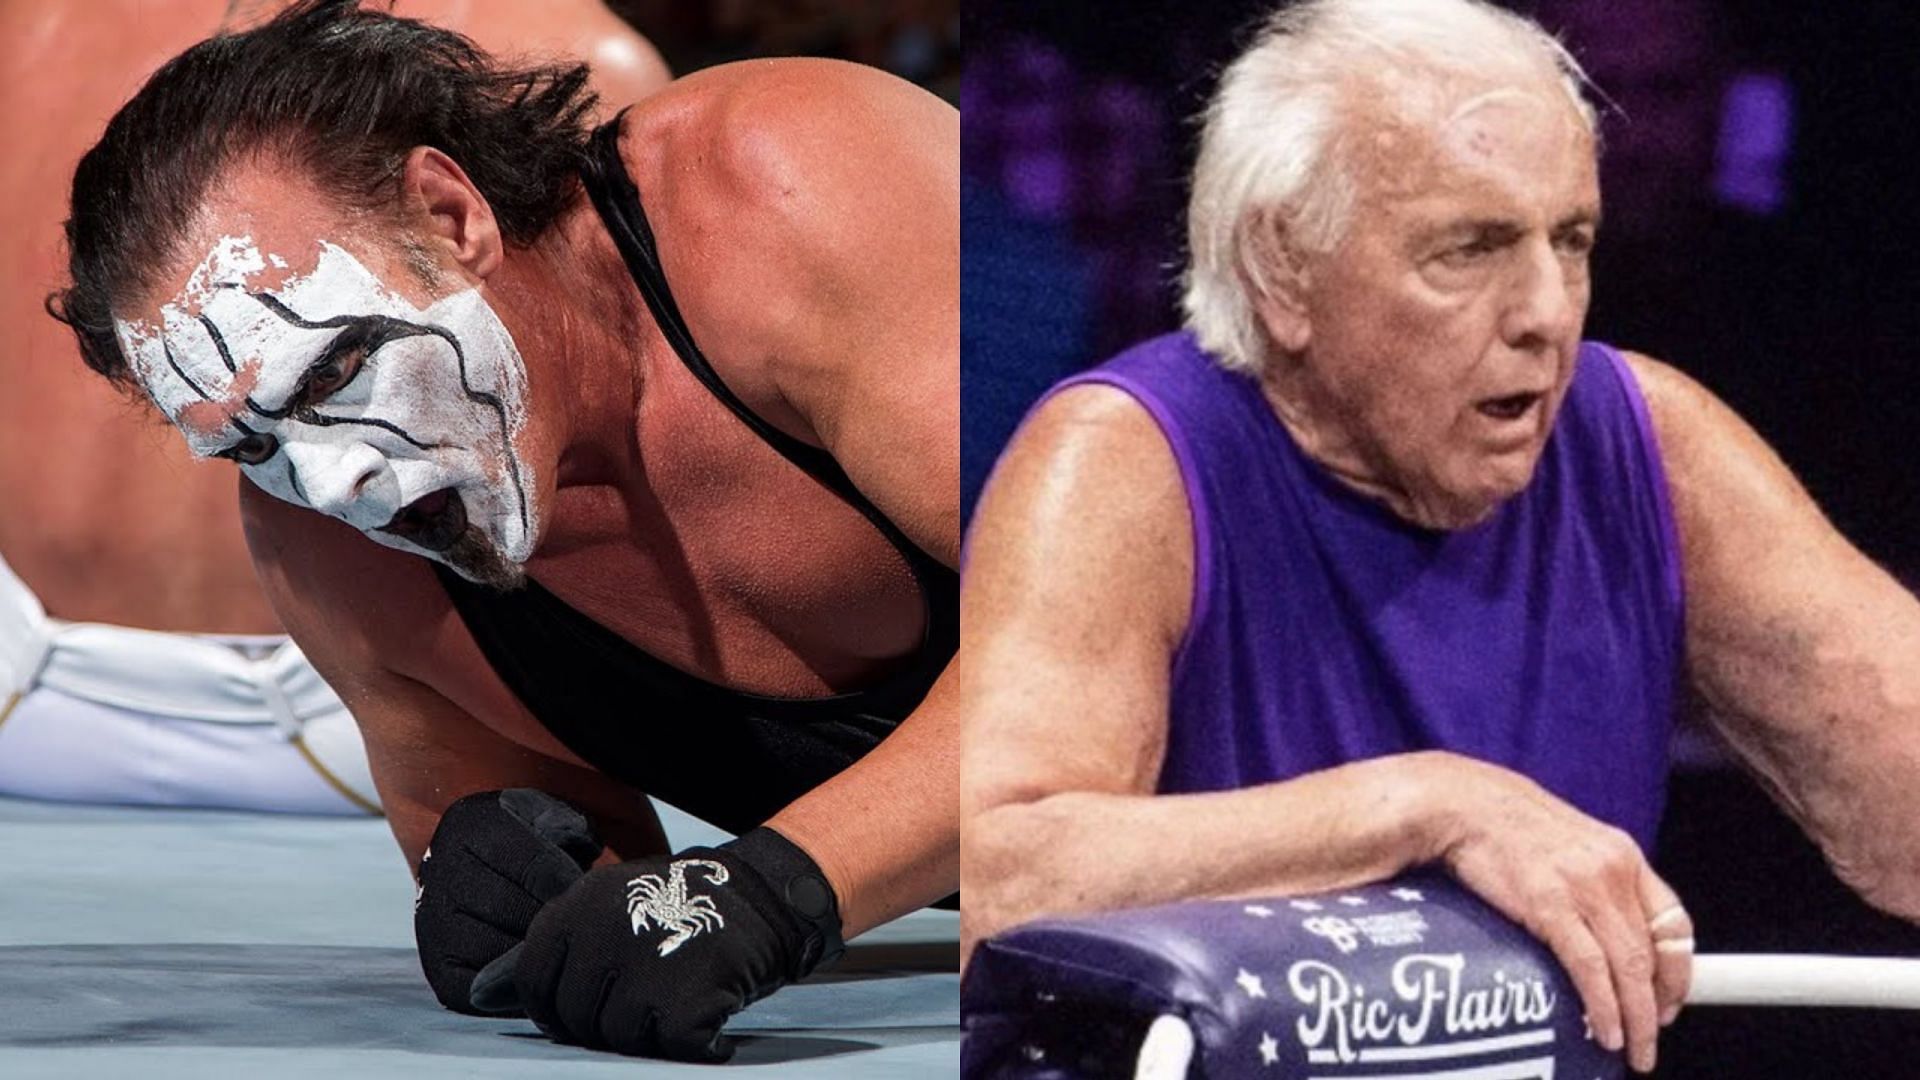 Would Sting be able to turn down one more match with Ric Flair?